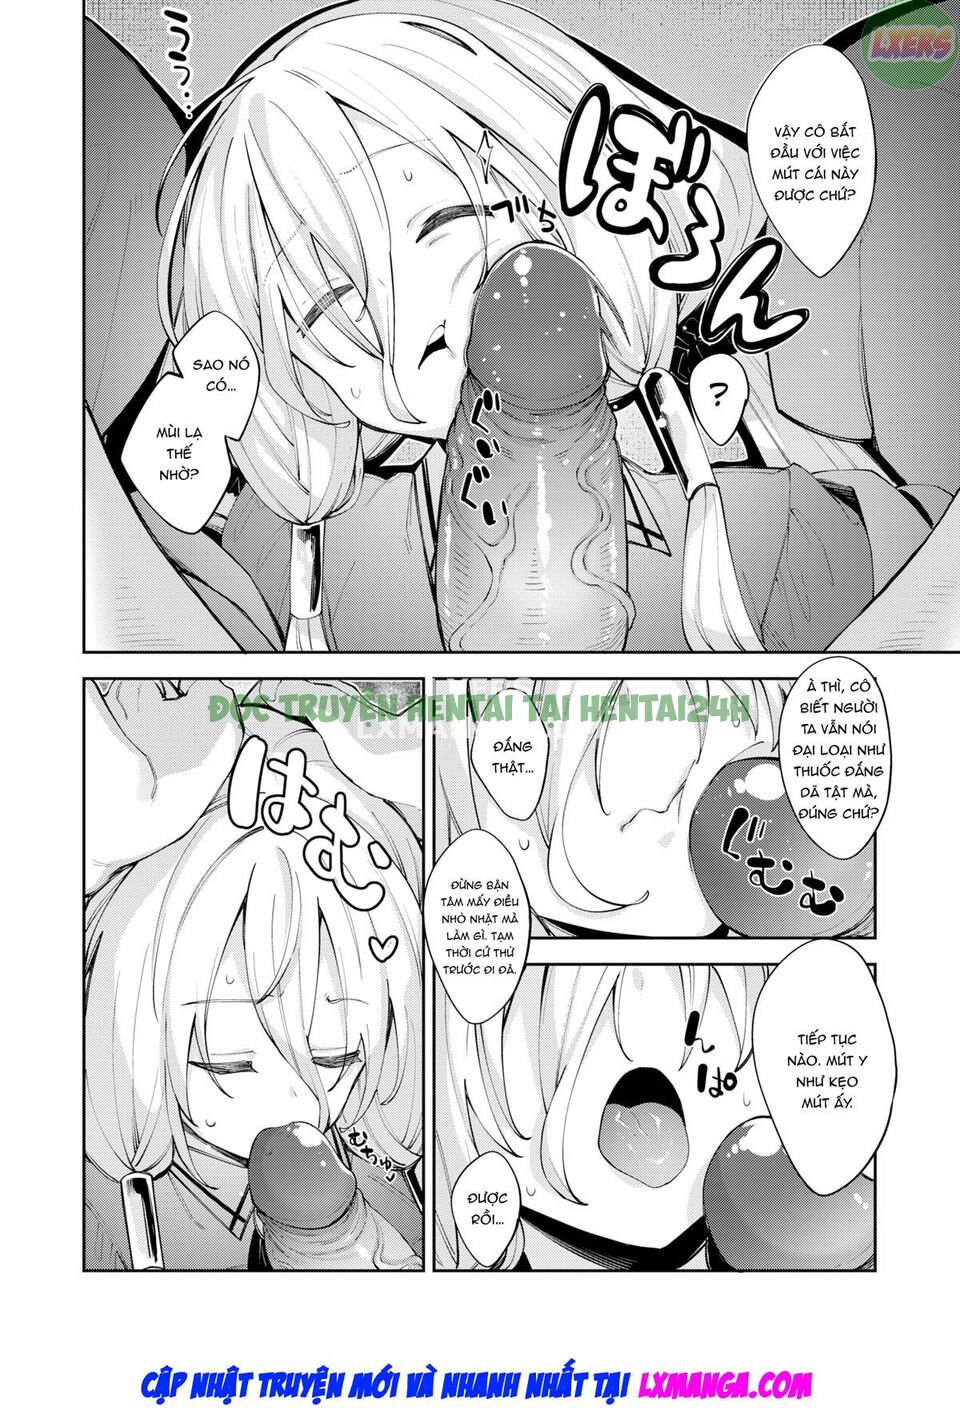 Xem ảnh I Was Summoned To Another World, So I'm Going To Take Advantage Of My Honed Body To Get Lucky - Chapter 2 END - 8 - Hentai24h.Tv